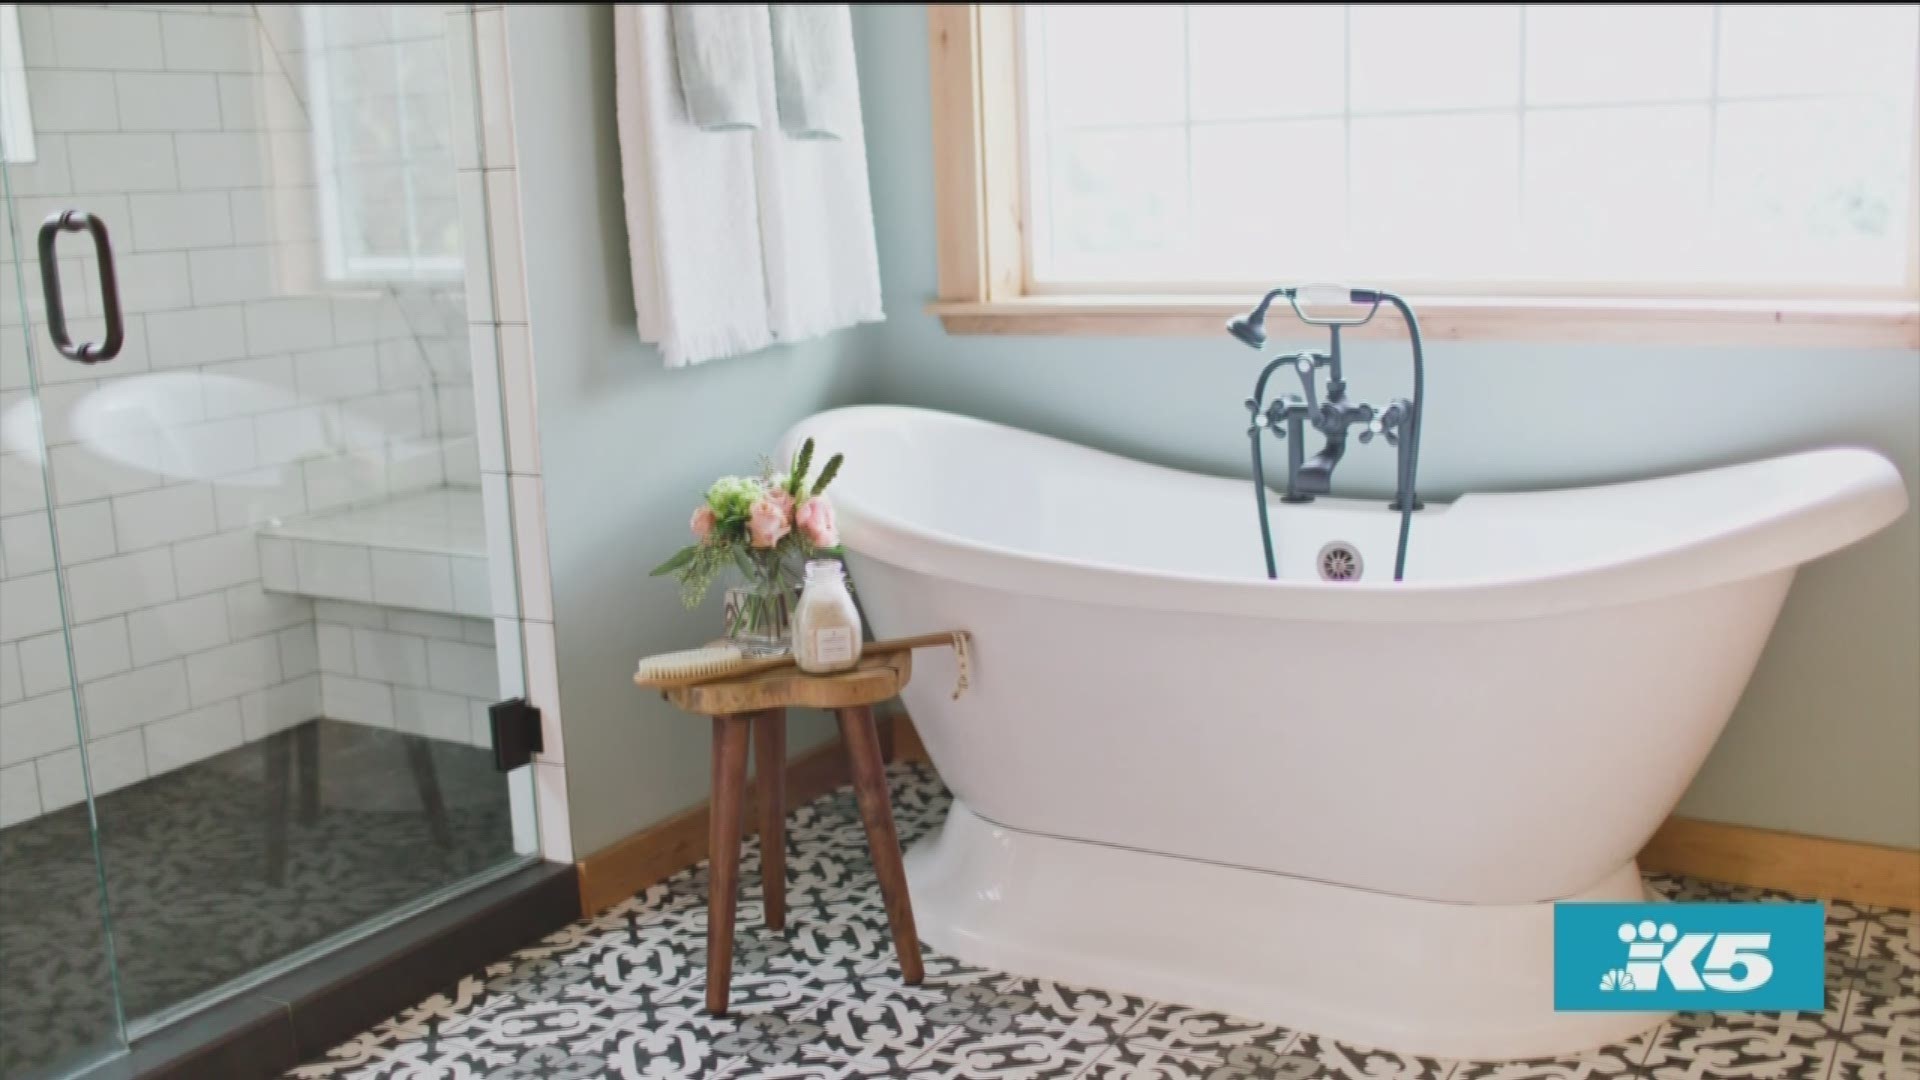 Interior designer Holly Bero is sharing what you should splurge on and where you can save when freshening up your home's style.